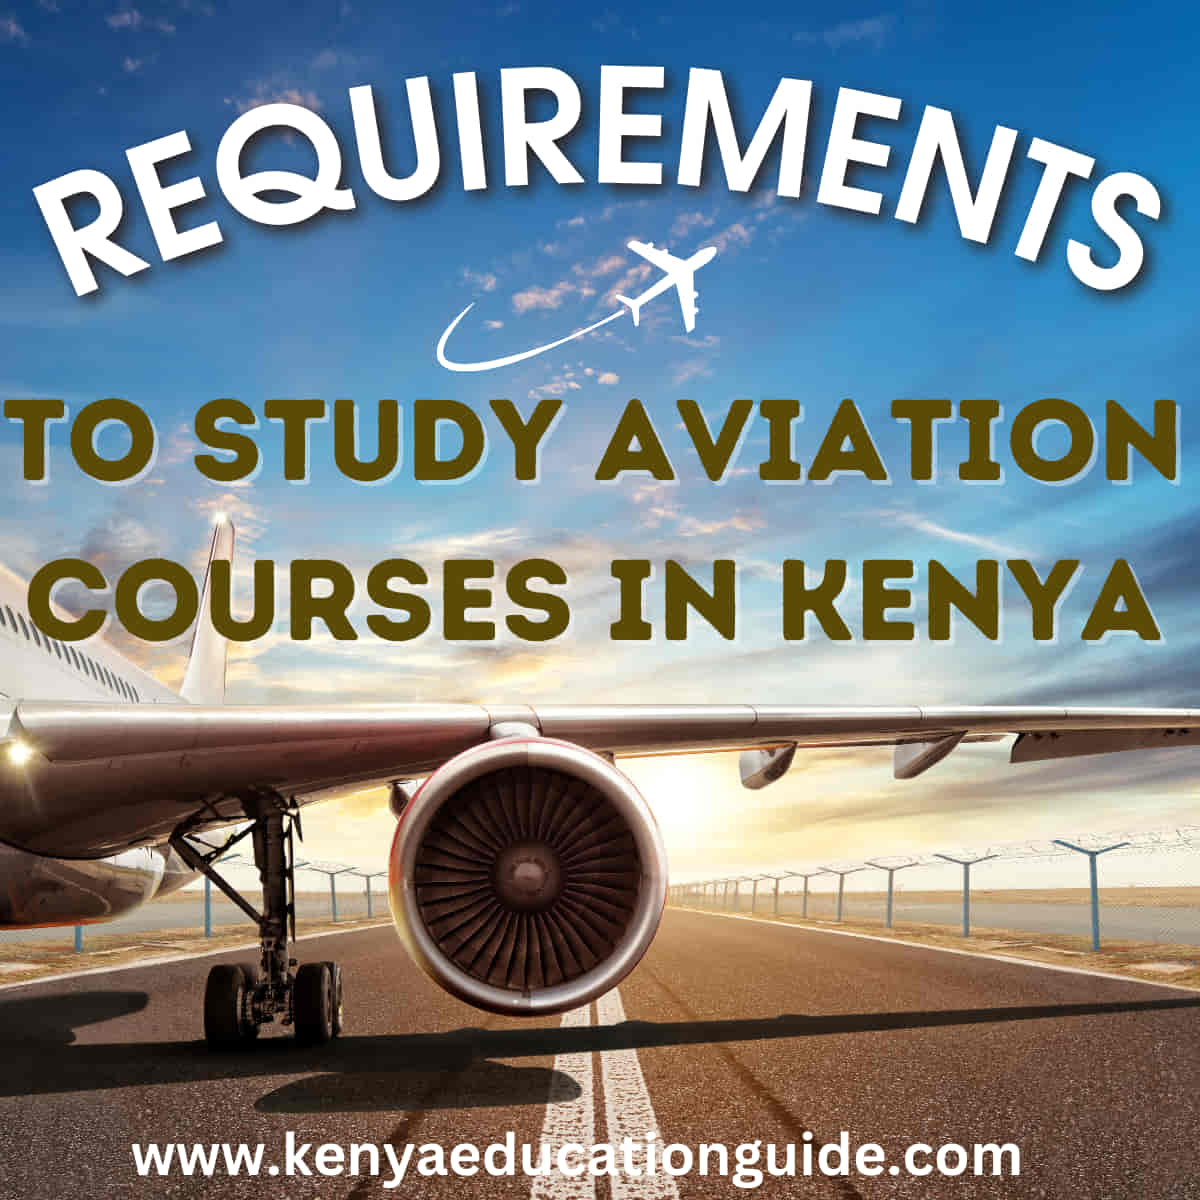 Aviation courses in Kenya requirements